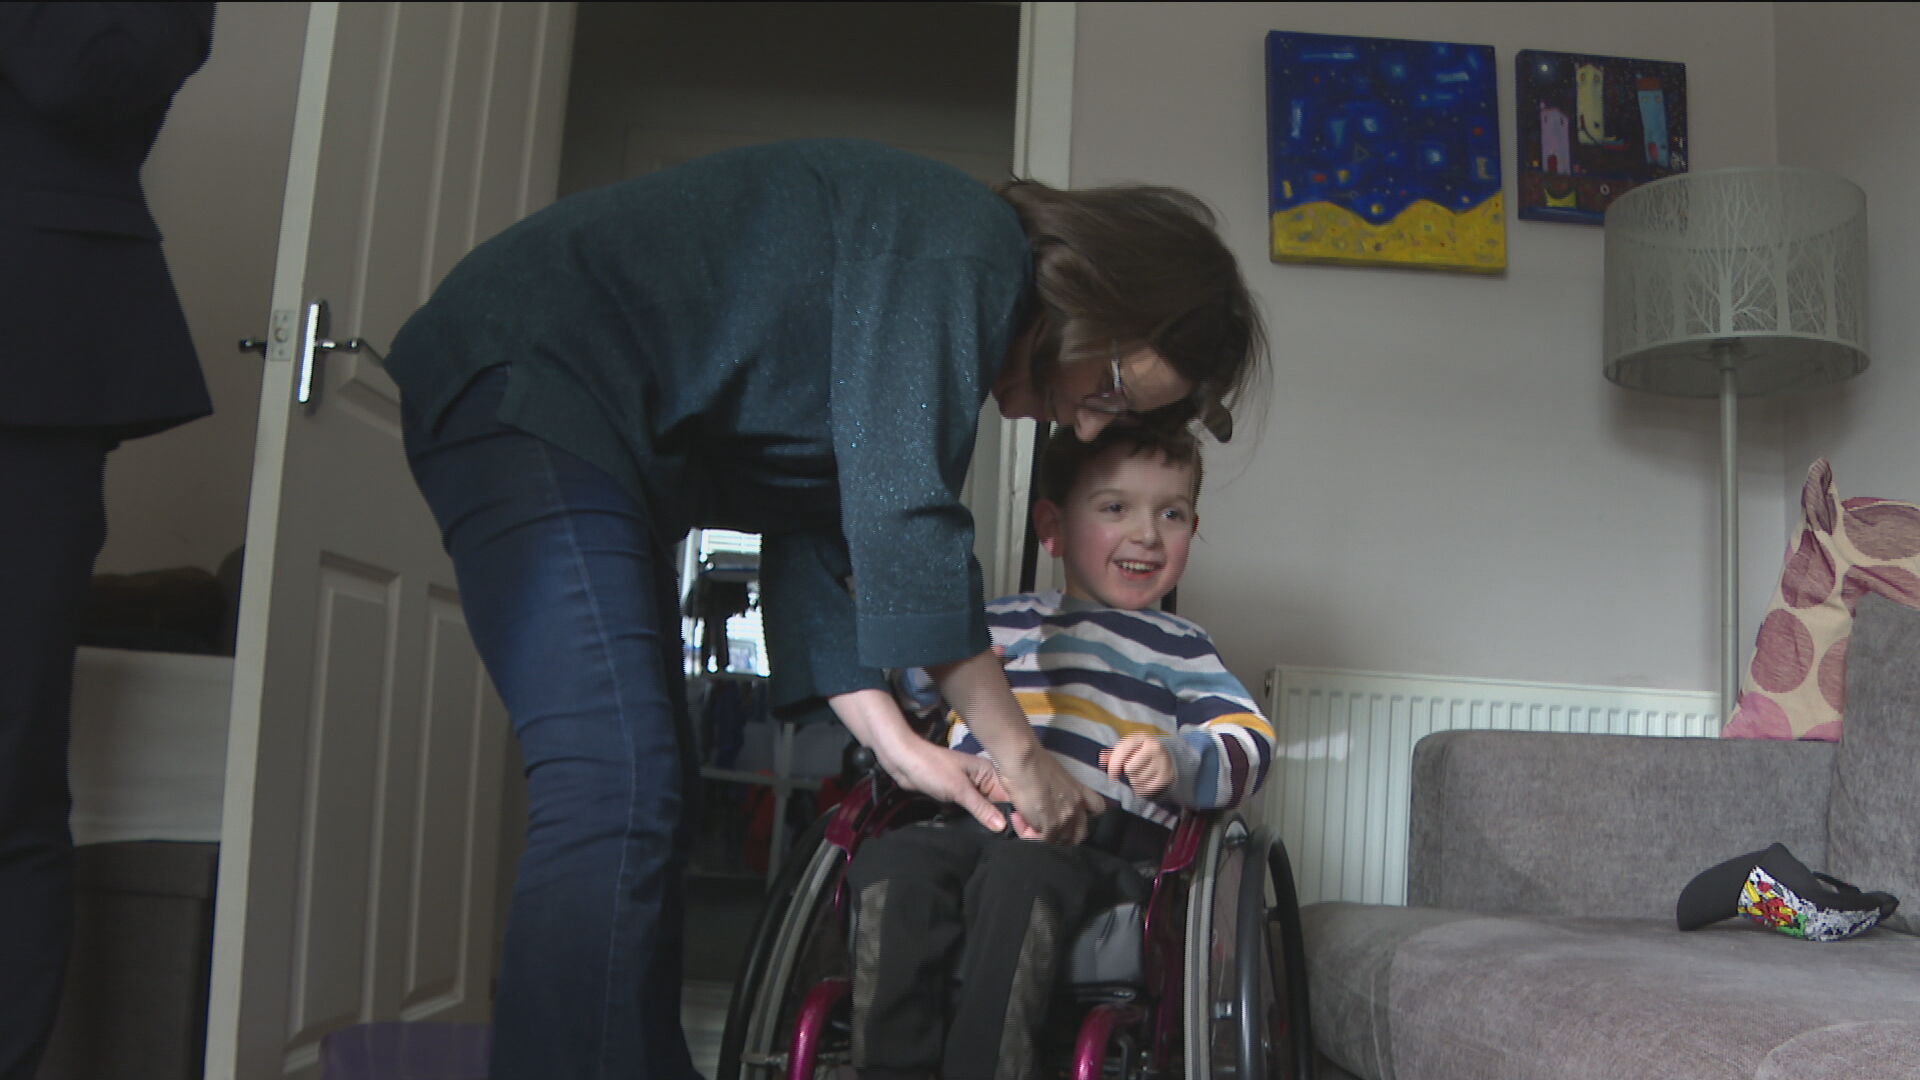 Nathaniel is a full-time wheelchair user